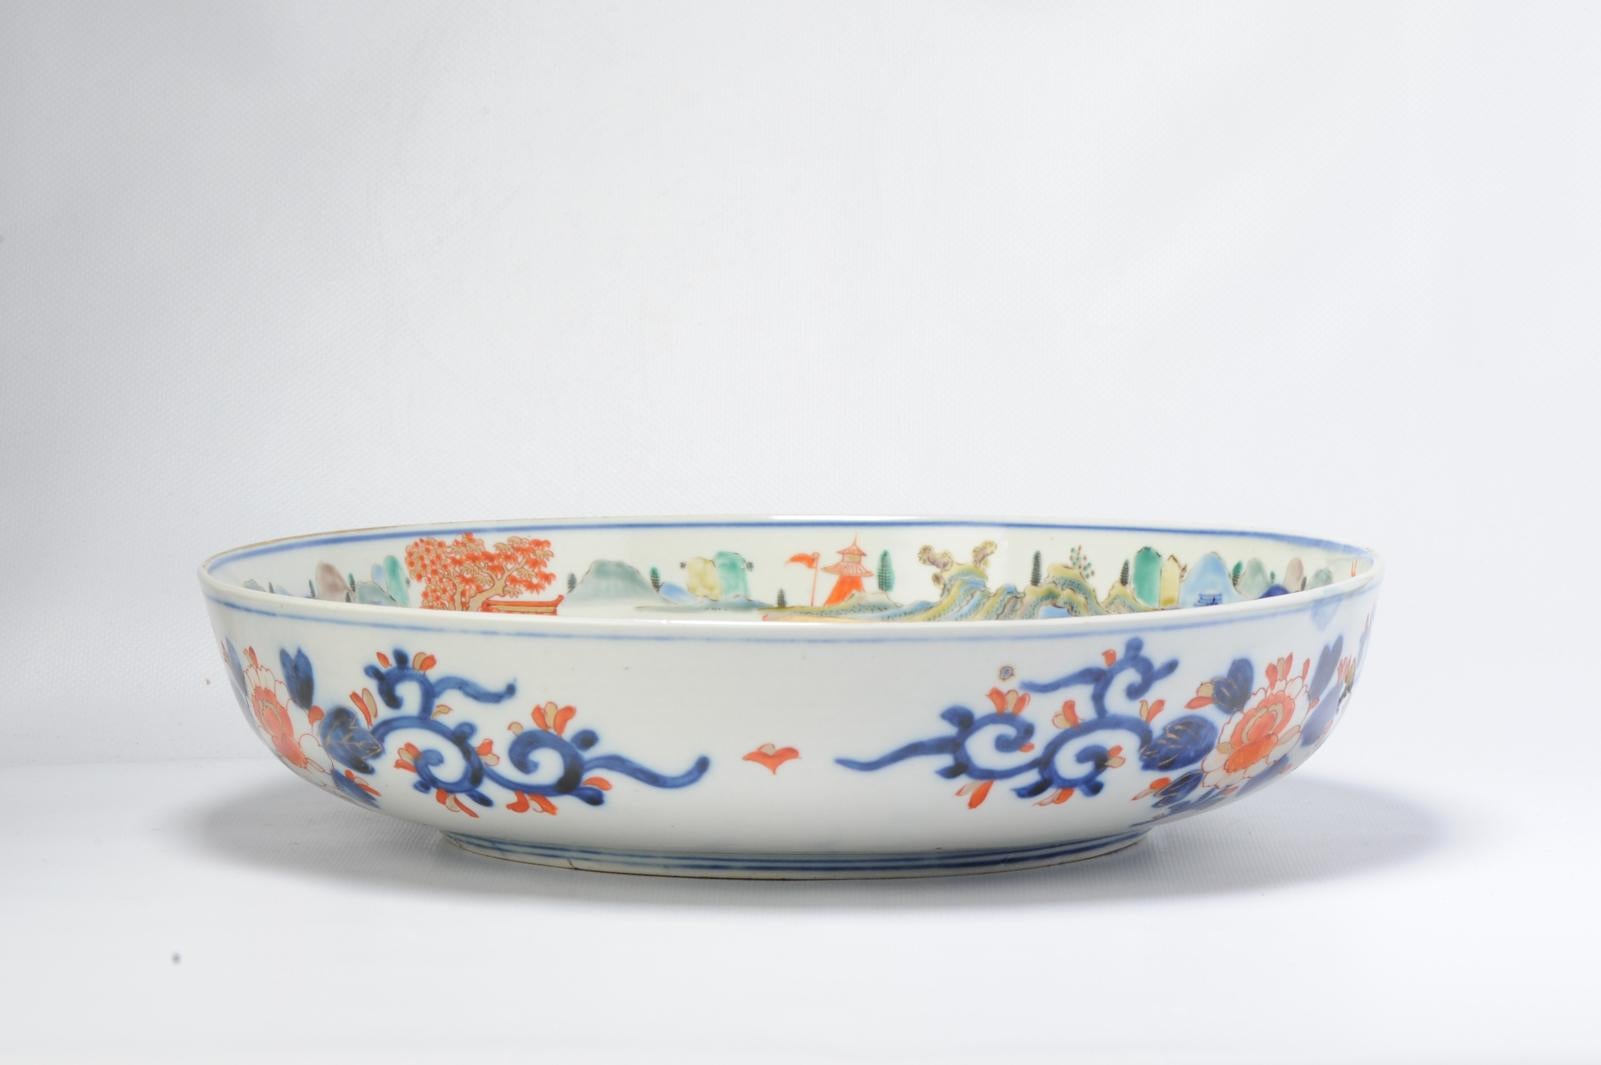 Amazing and large Japanese Basin/Deep serving dish with a polychrome scene of a landscape in the border and part of the centre. Central a pagode is painted on waves with 3 figures standing/walking besides it. Absolutely astonishing piece. Blue and